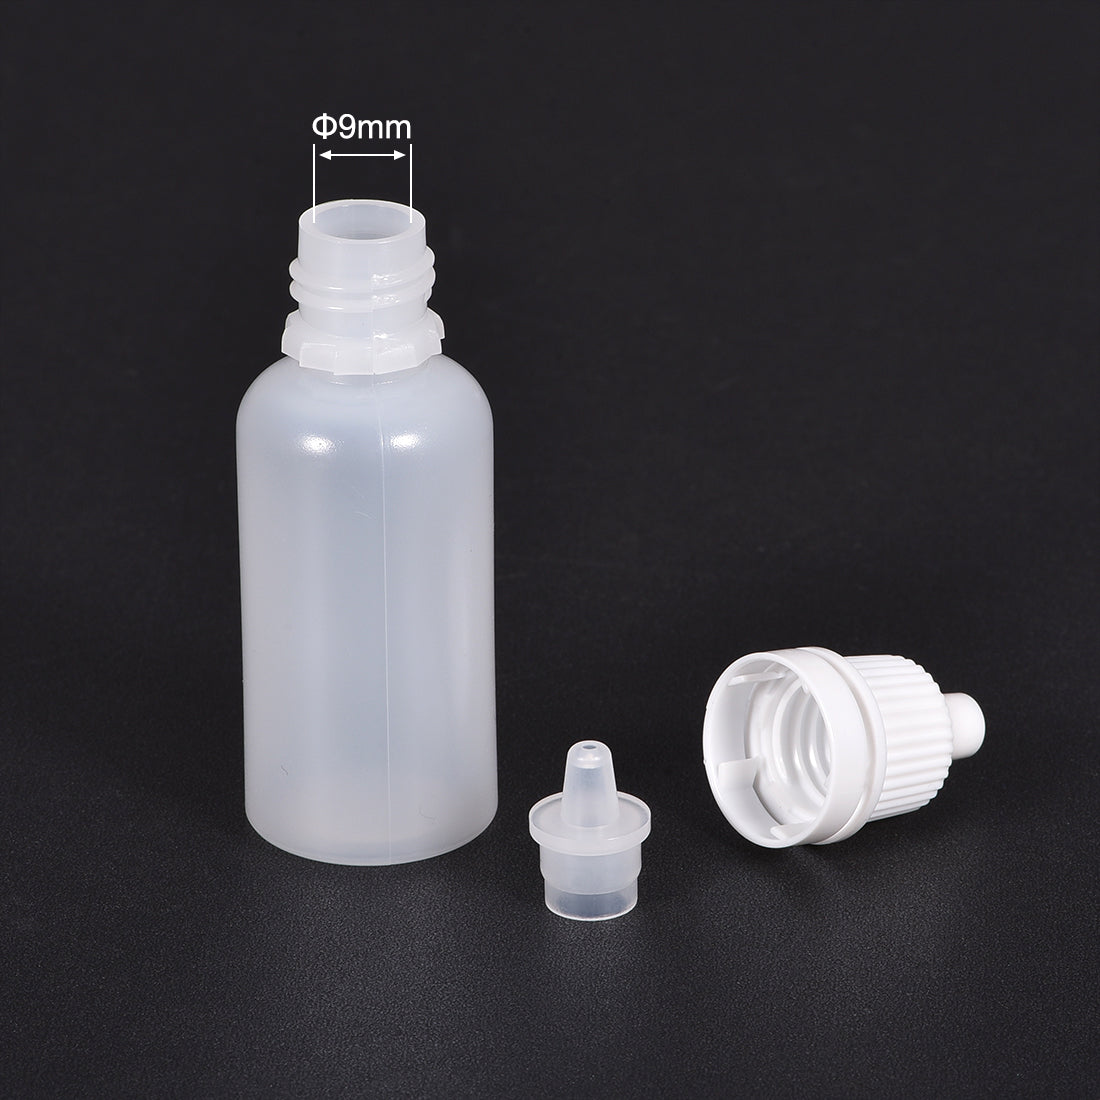 uxcell Uxcell 15ml/0.5 oz Empty Squeezable Dropper Bottle White 20pcs